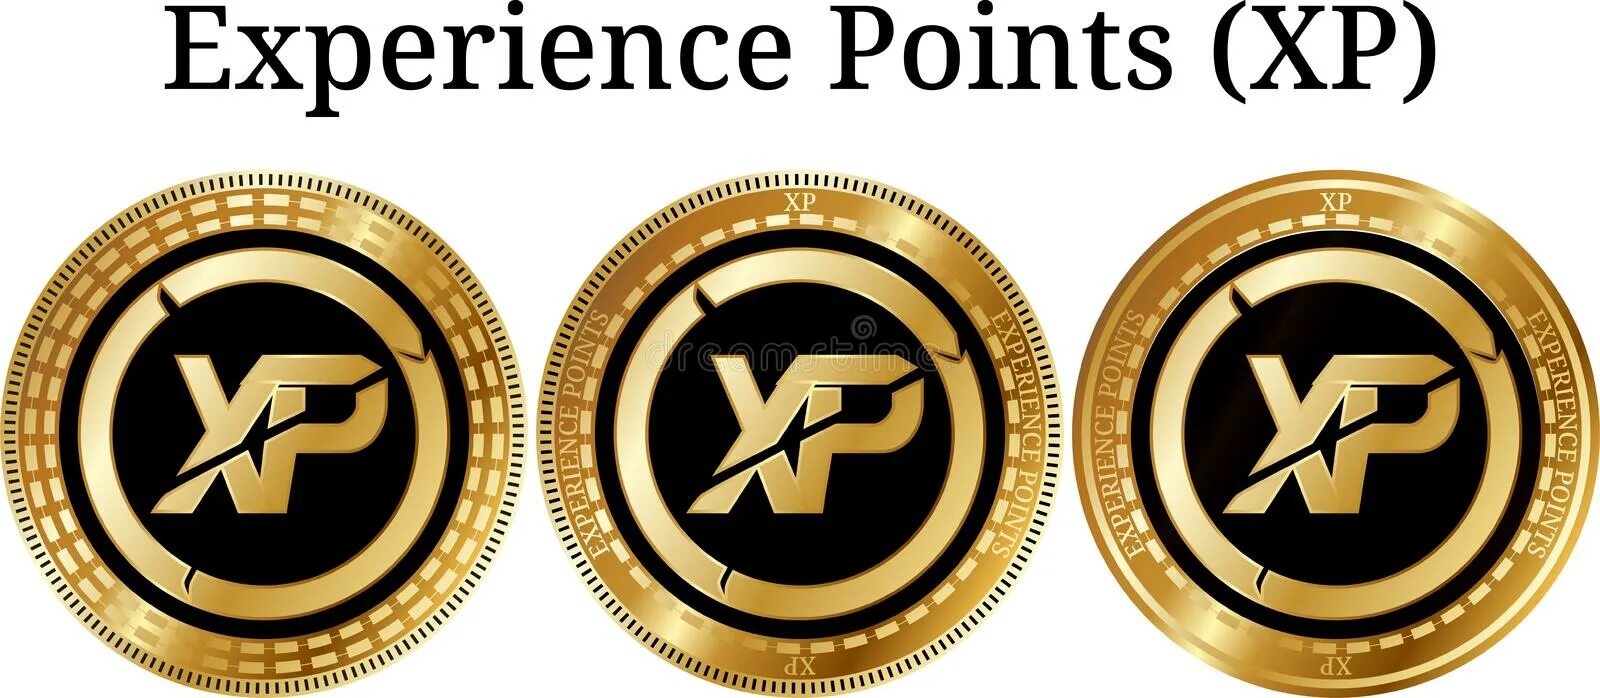 Golden Coin шины. Experience points XP. 3 Experience points.